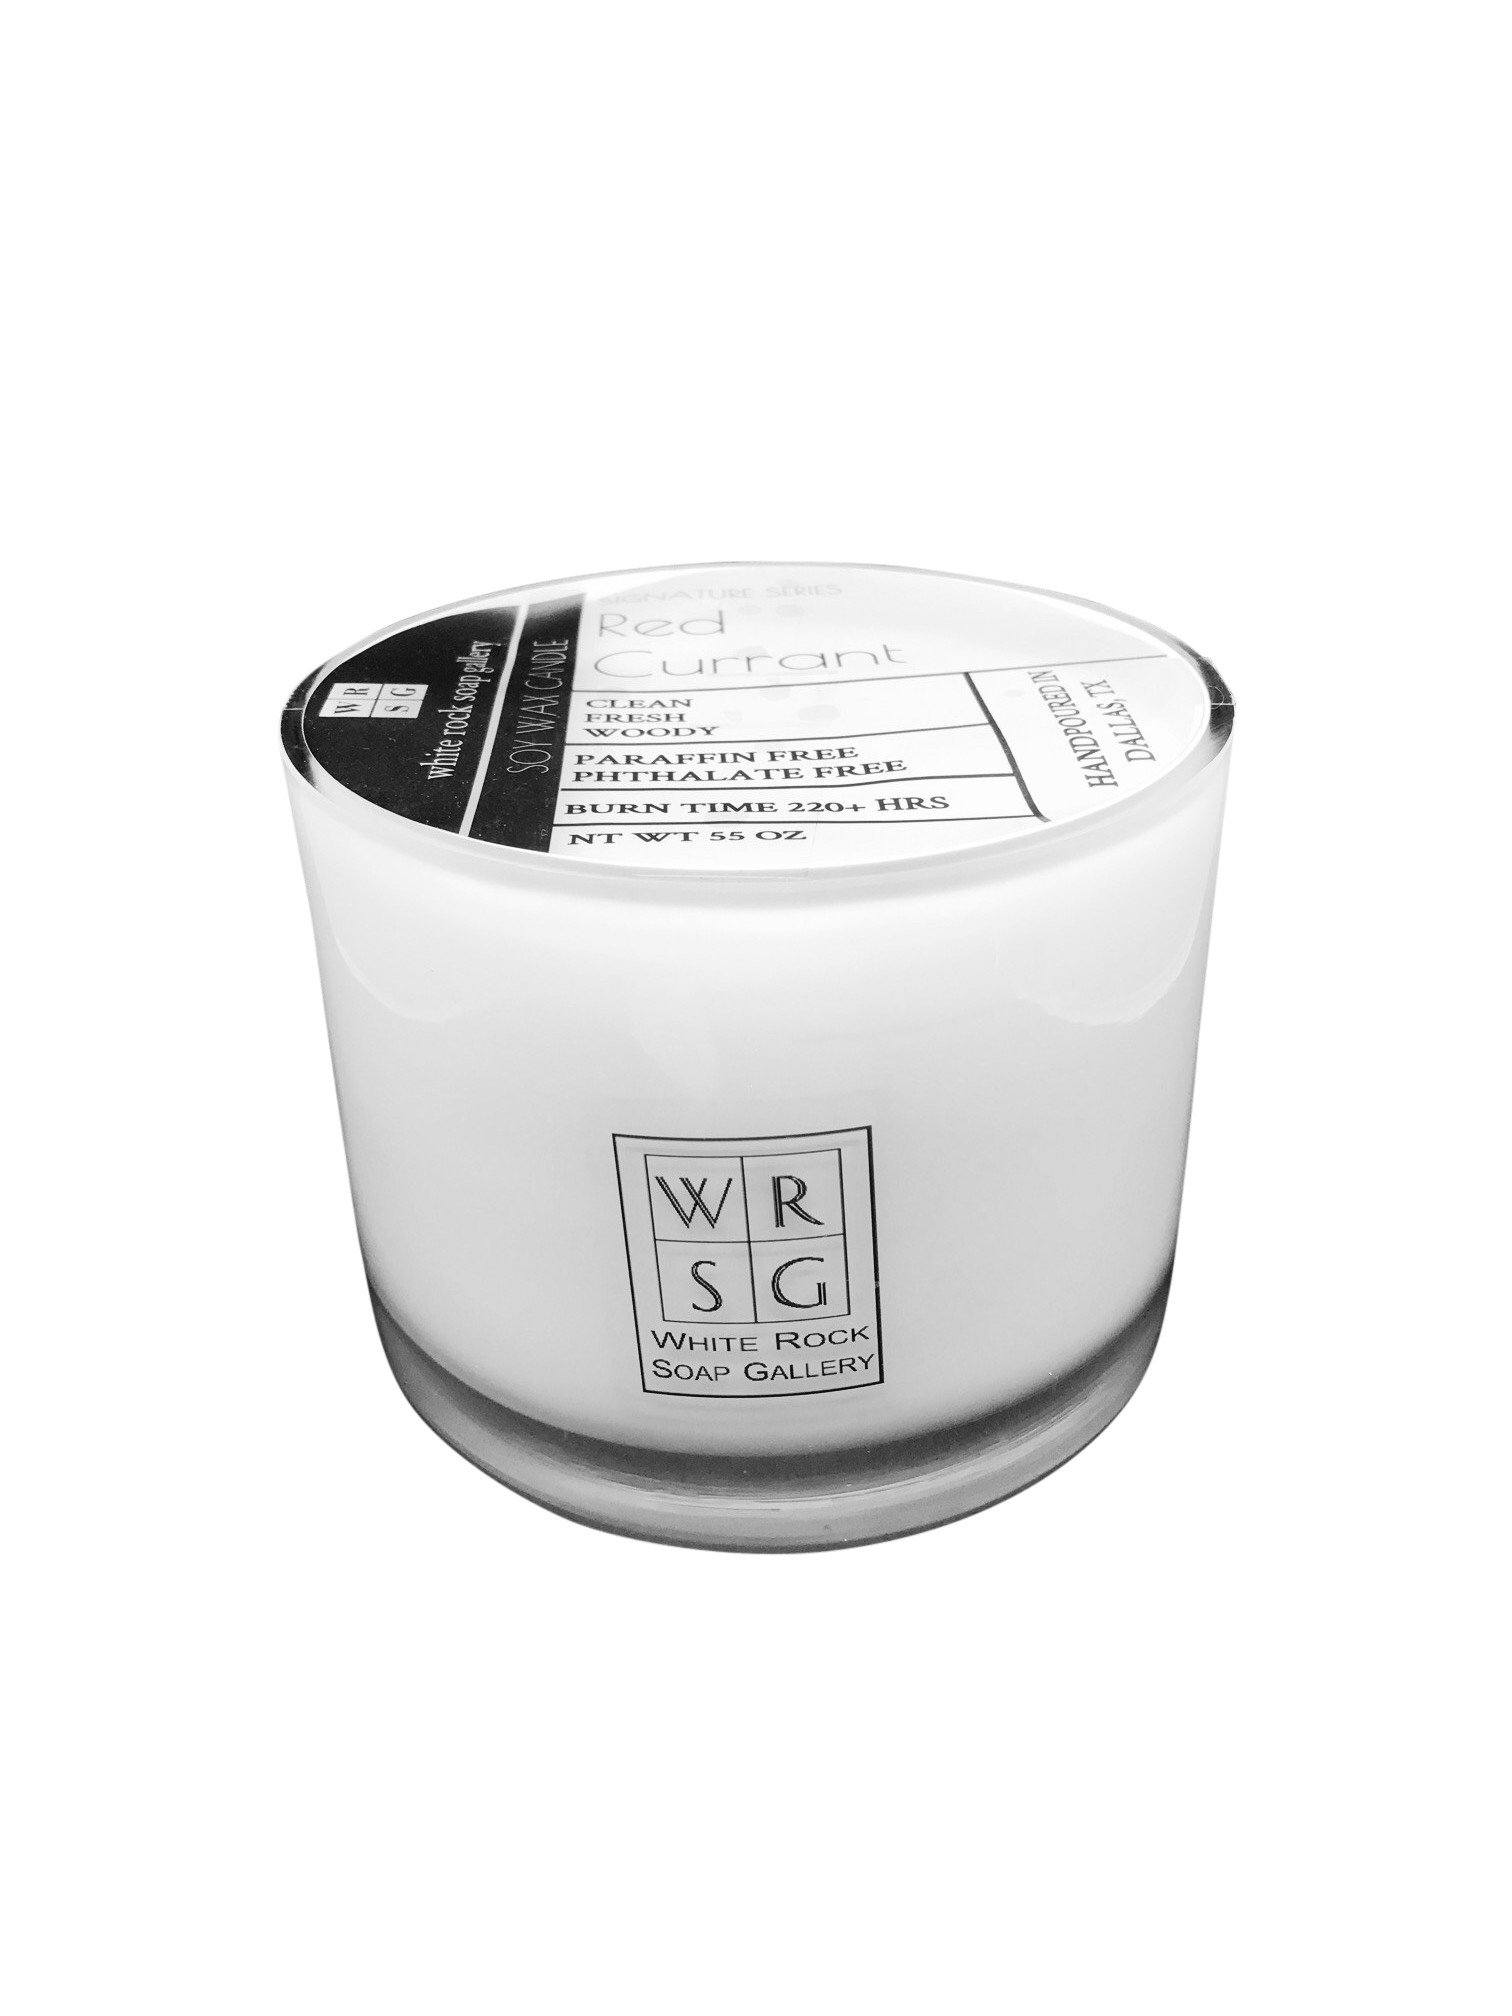 Soy Wax Candle - Signature Series - White Rock Soap Gallery